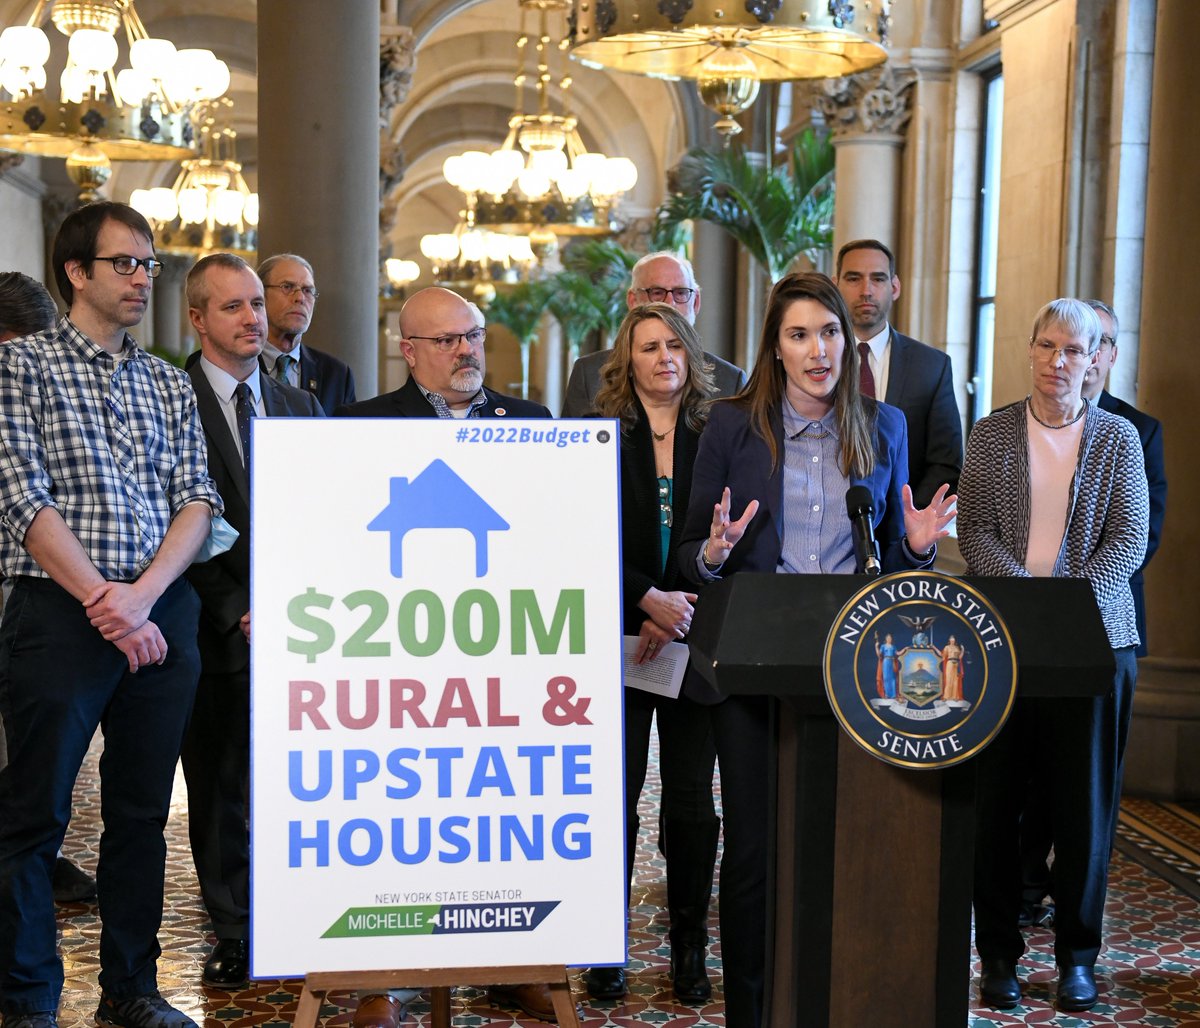 Upstate is on the frontline of NY's #housing crisis, & yet we are consistently left out of the conversation when we talk about solutions. That needs to change. I'm calling on the Legislature to stand up for all New Yorkers & deliver record funding for housing in the #2022Budget.